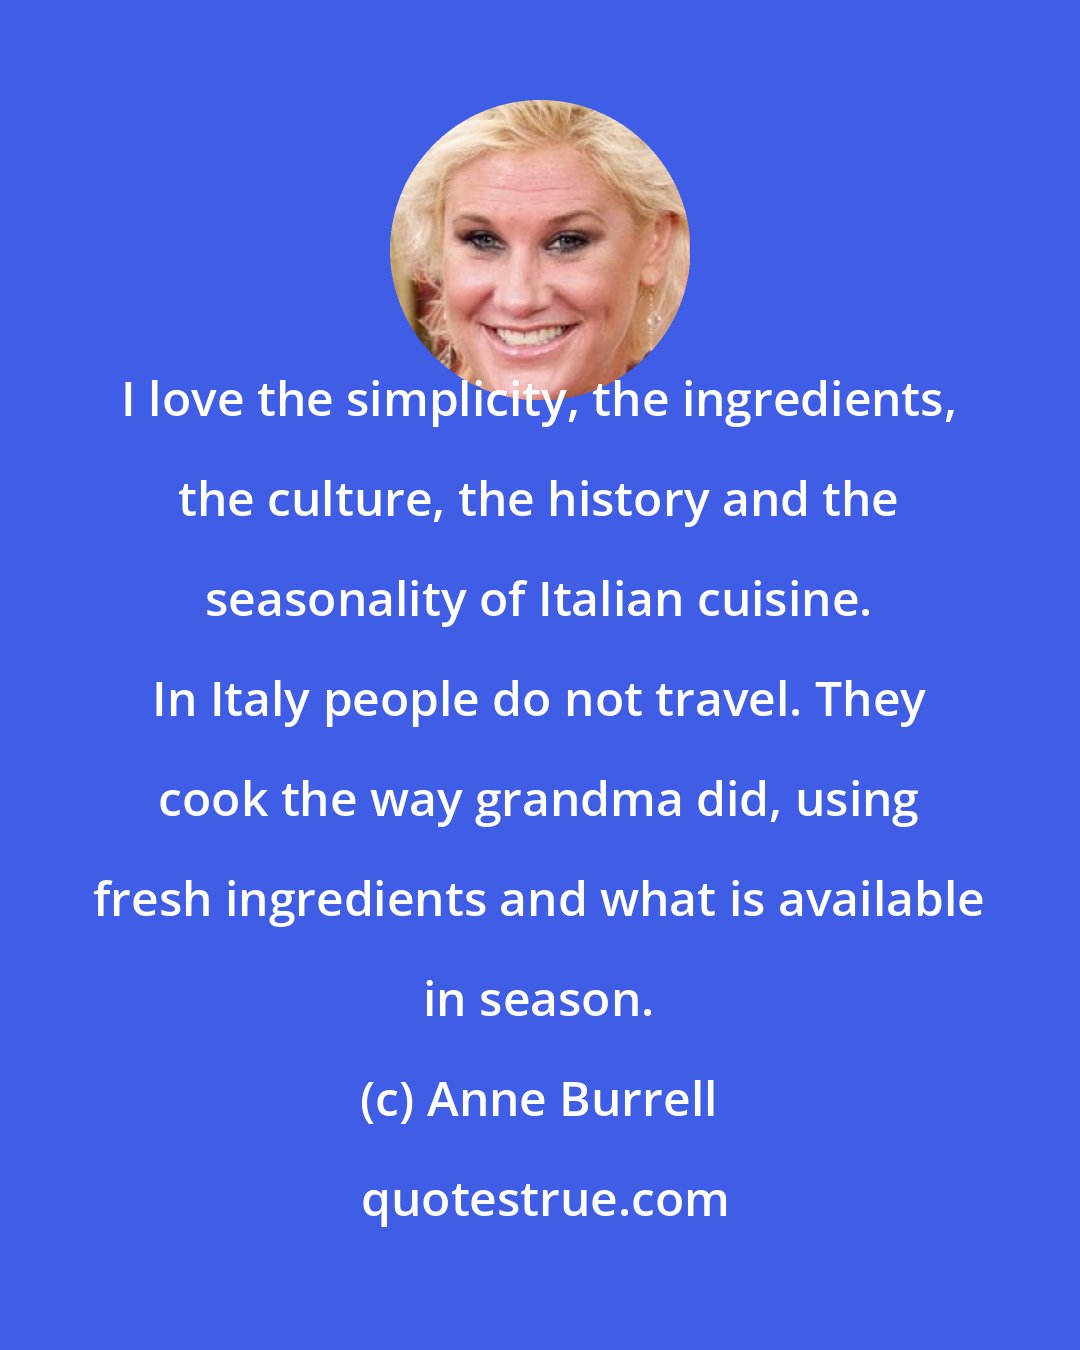 Anne Burrell: I love the simplicity, the ingredients, the culture, the history and the seasonality of Italian cuisine. In Italy people do not travel. They cook the way grandma did, using fresh ingredients and what is available in season.